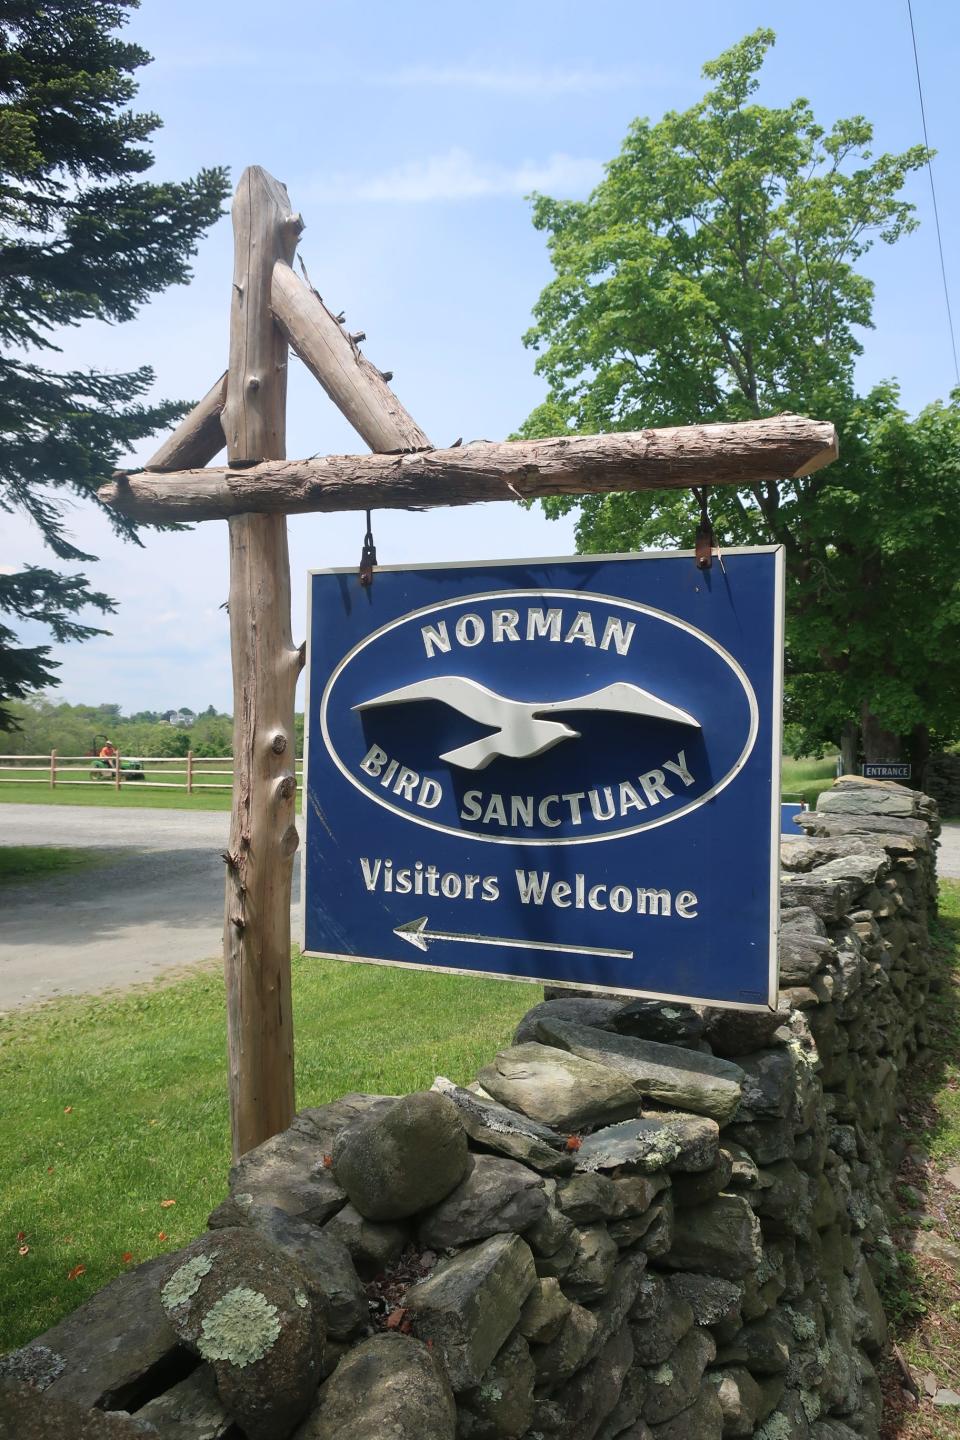 The Norman Bird Sanctuary is celebrating its 75th anniversary in 2024.